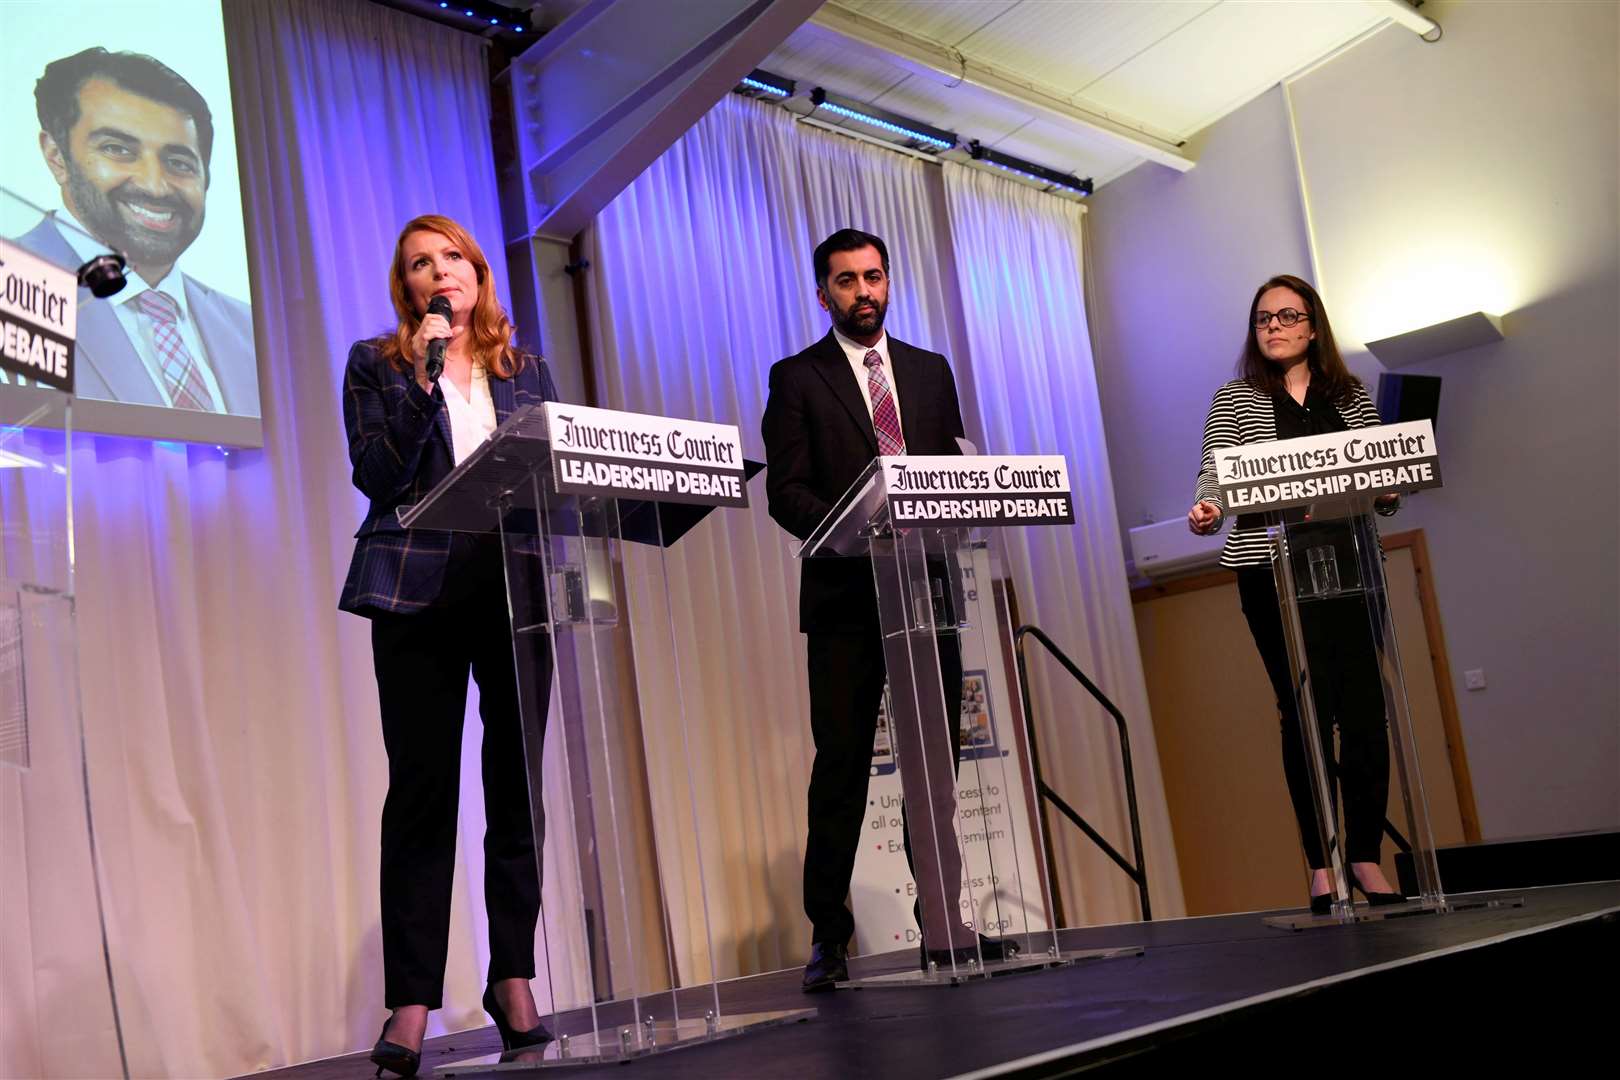 Nicky Marr, Ash Regan, Humzah Yousaf and Kate Forbes. Picture: Callum Mackay.